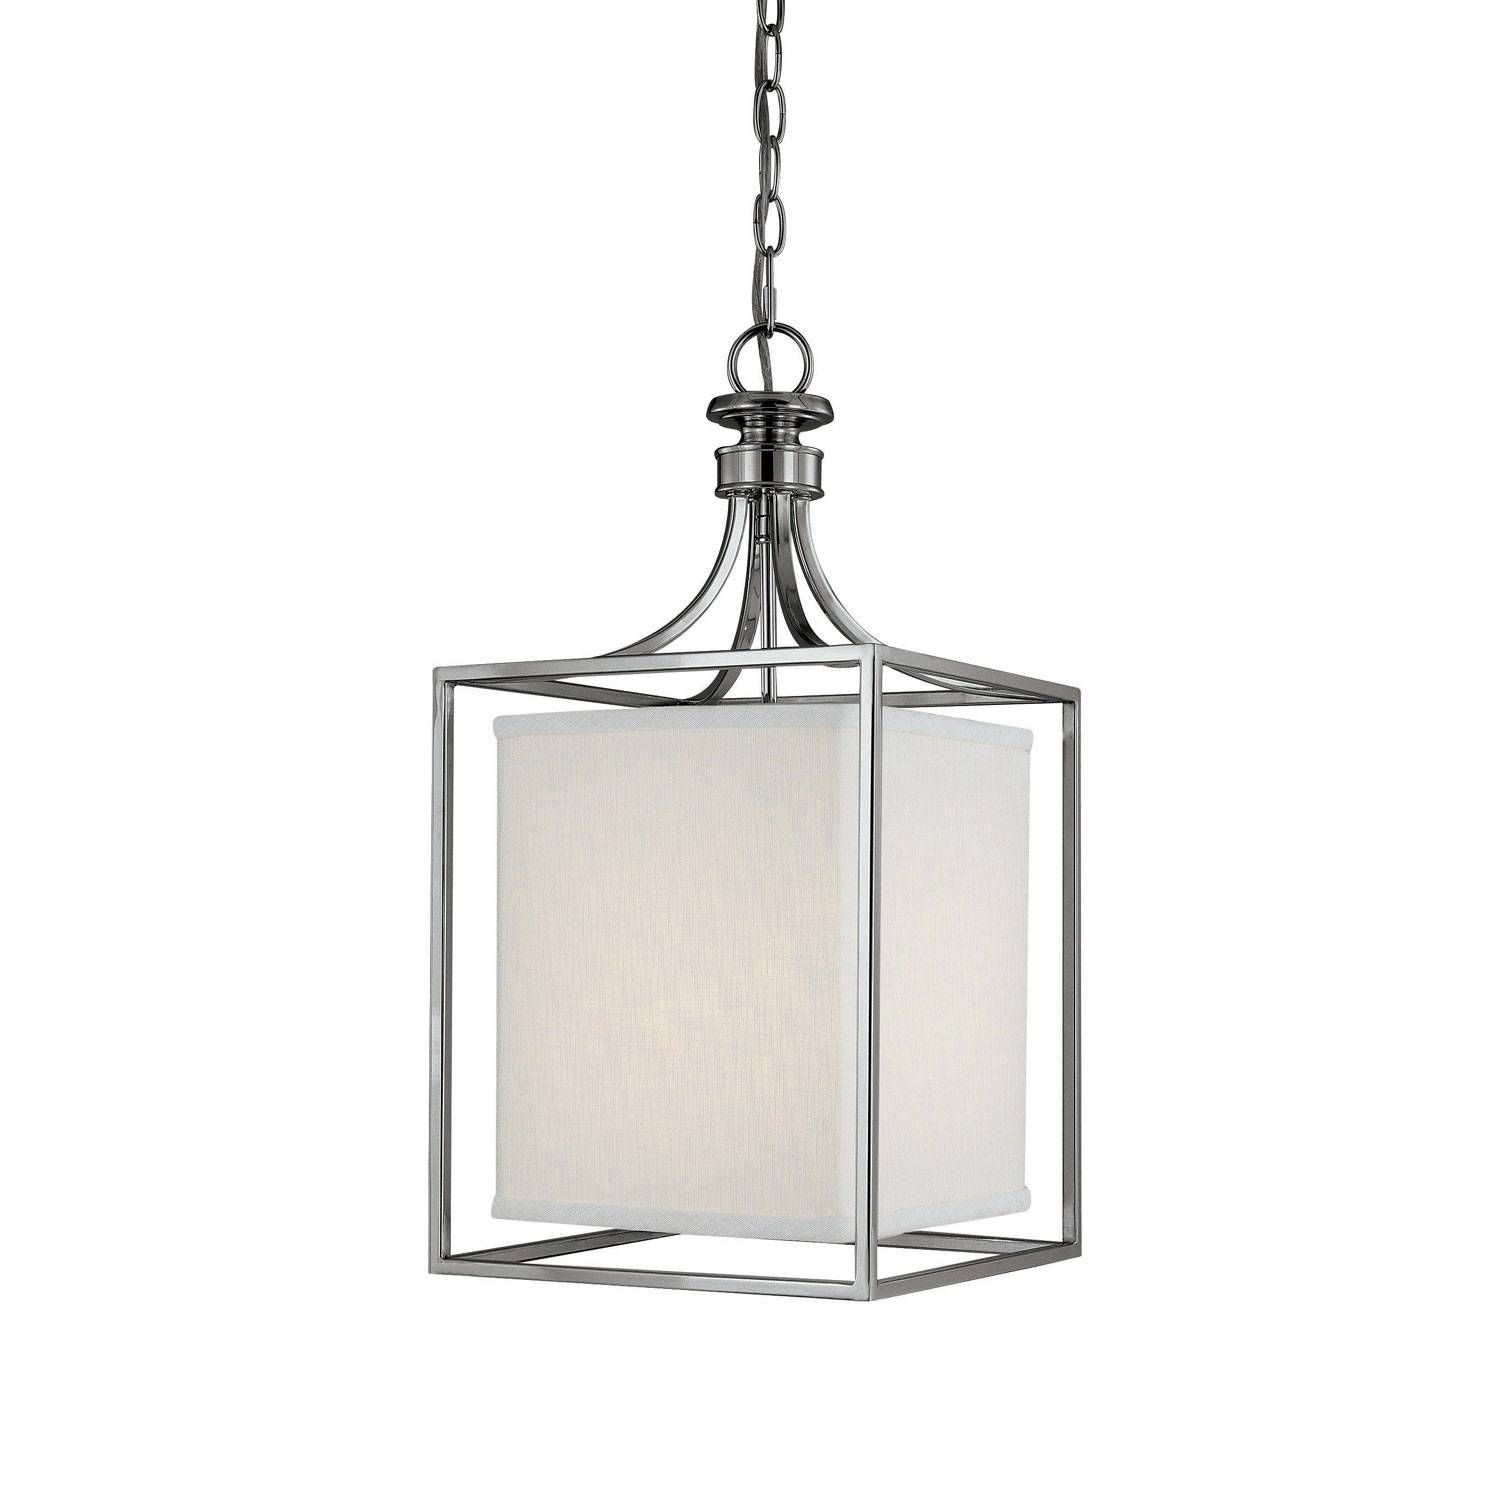 Capital Lighting Fixture Company Midtown Polished Nickel Two Light Throughout Polished Nickel Pendant Lights Fixtures (View 5 of 15)